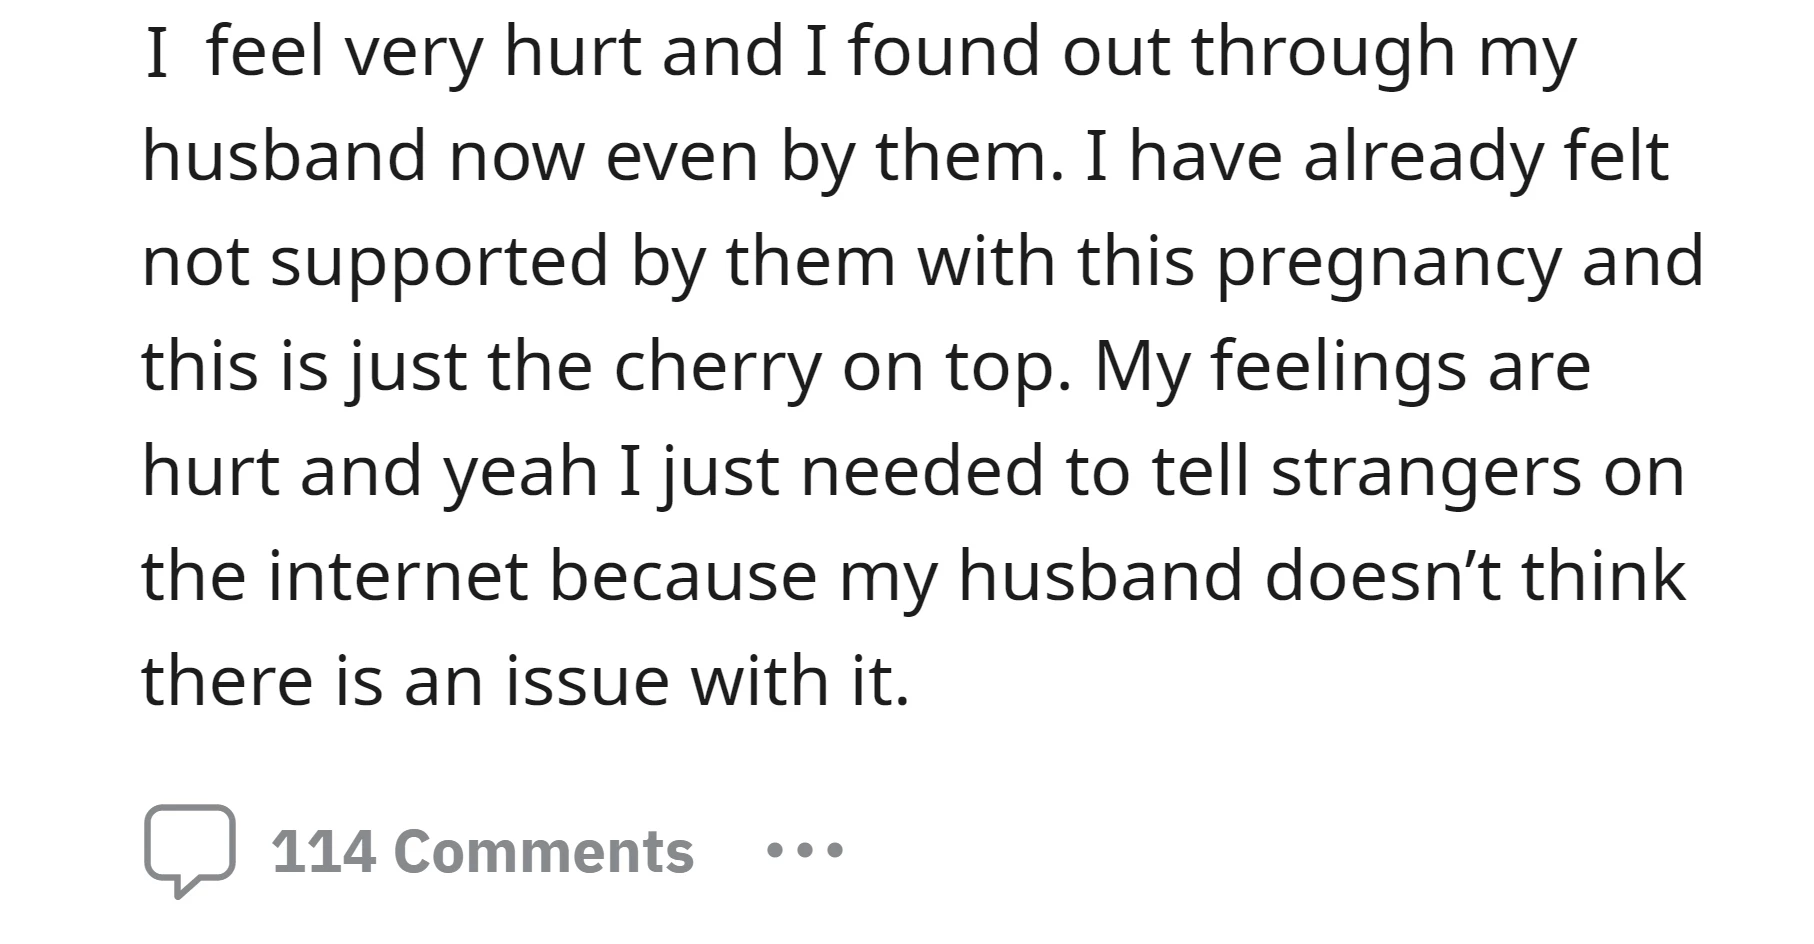 The OP feels hurt because her in-laws have already been unsupportive during the pregnancy